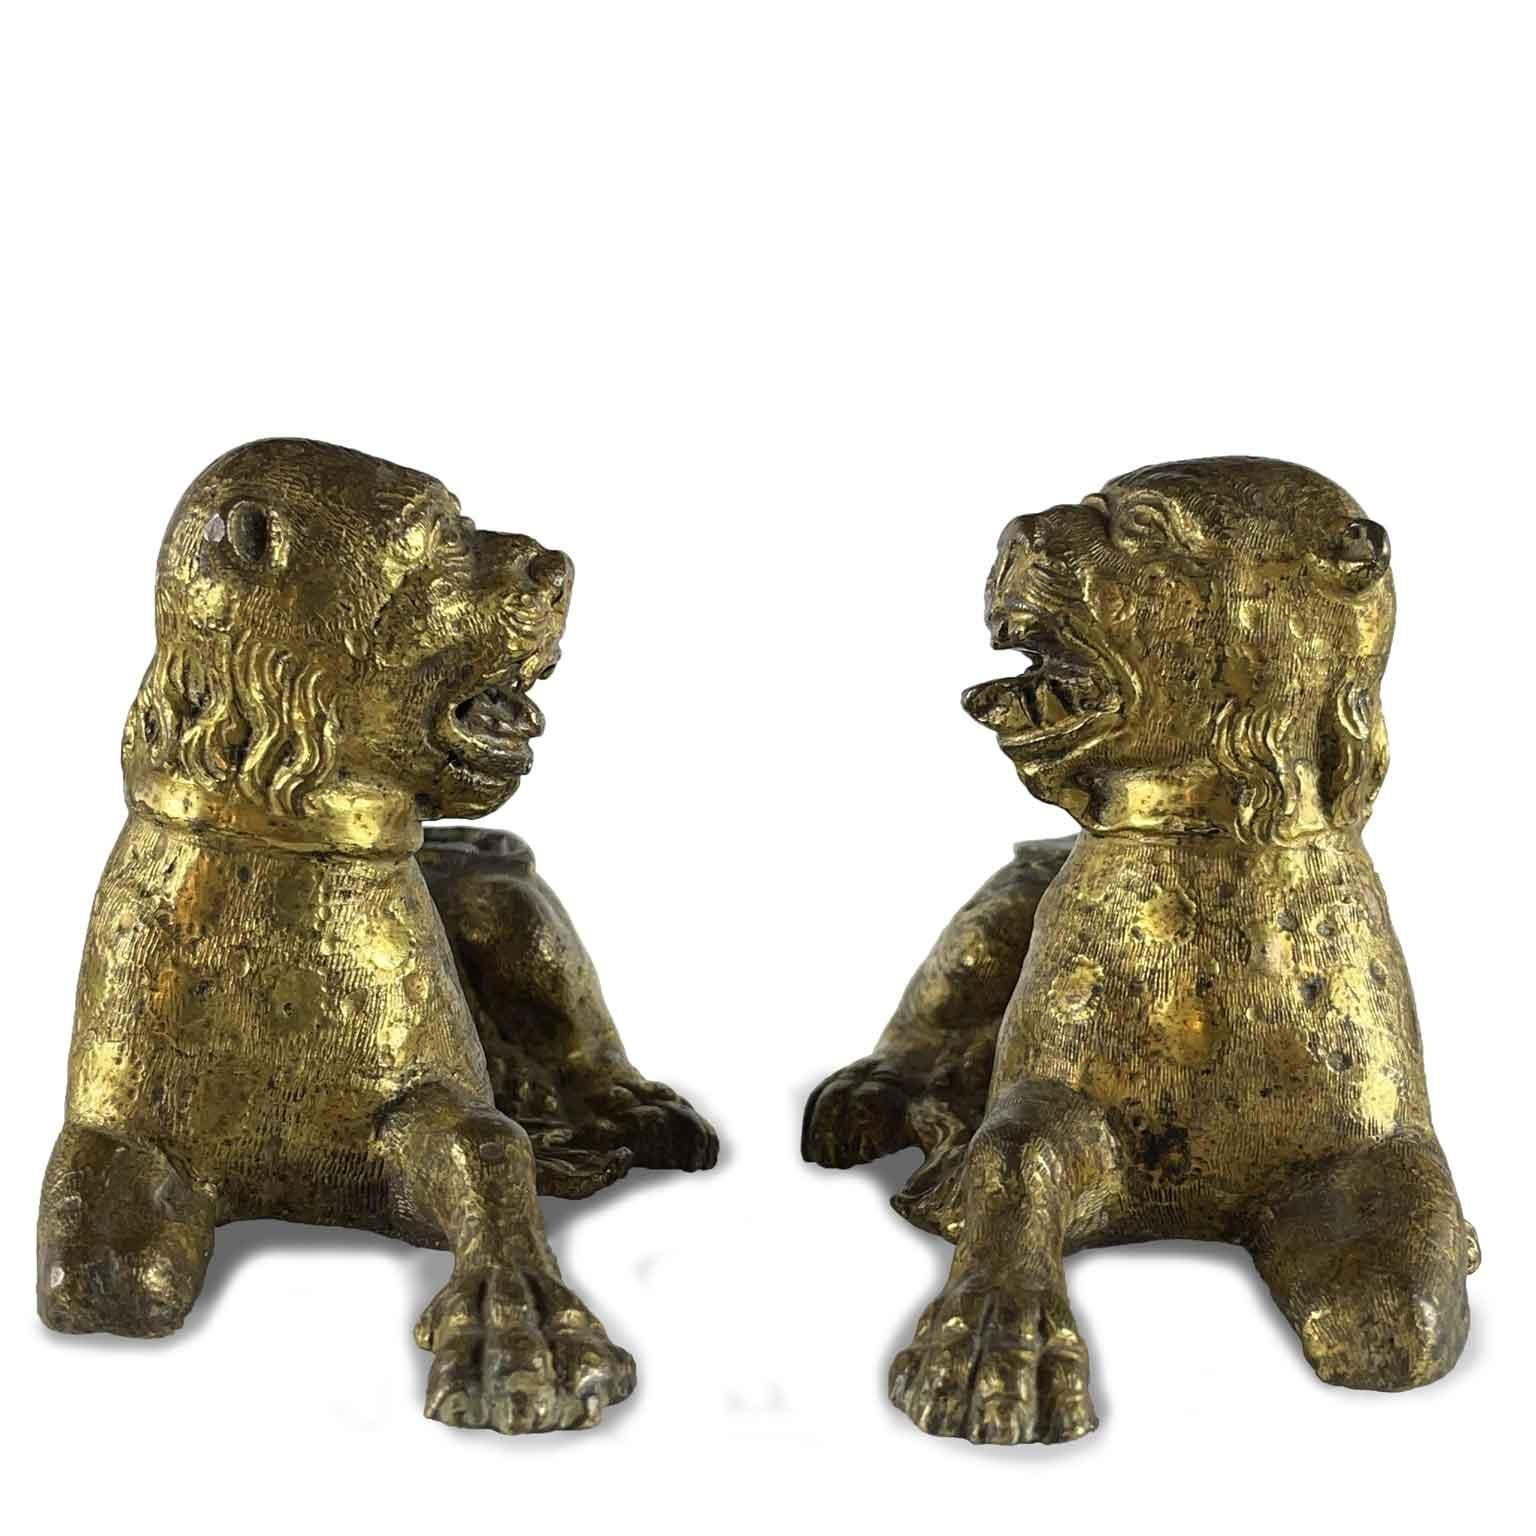 A stunning pair of 16th century stylophore lions, cast and gilt bronze figurative sculptures from Germany, Nuremberg.

The Stylophore Lions were figurative sculpture used in the Renaissance era to support pedestals at the entrance of the